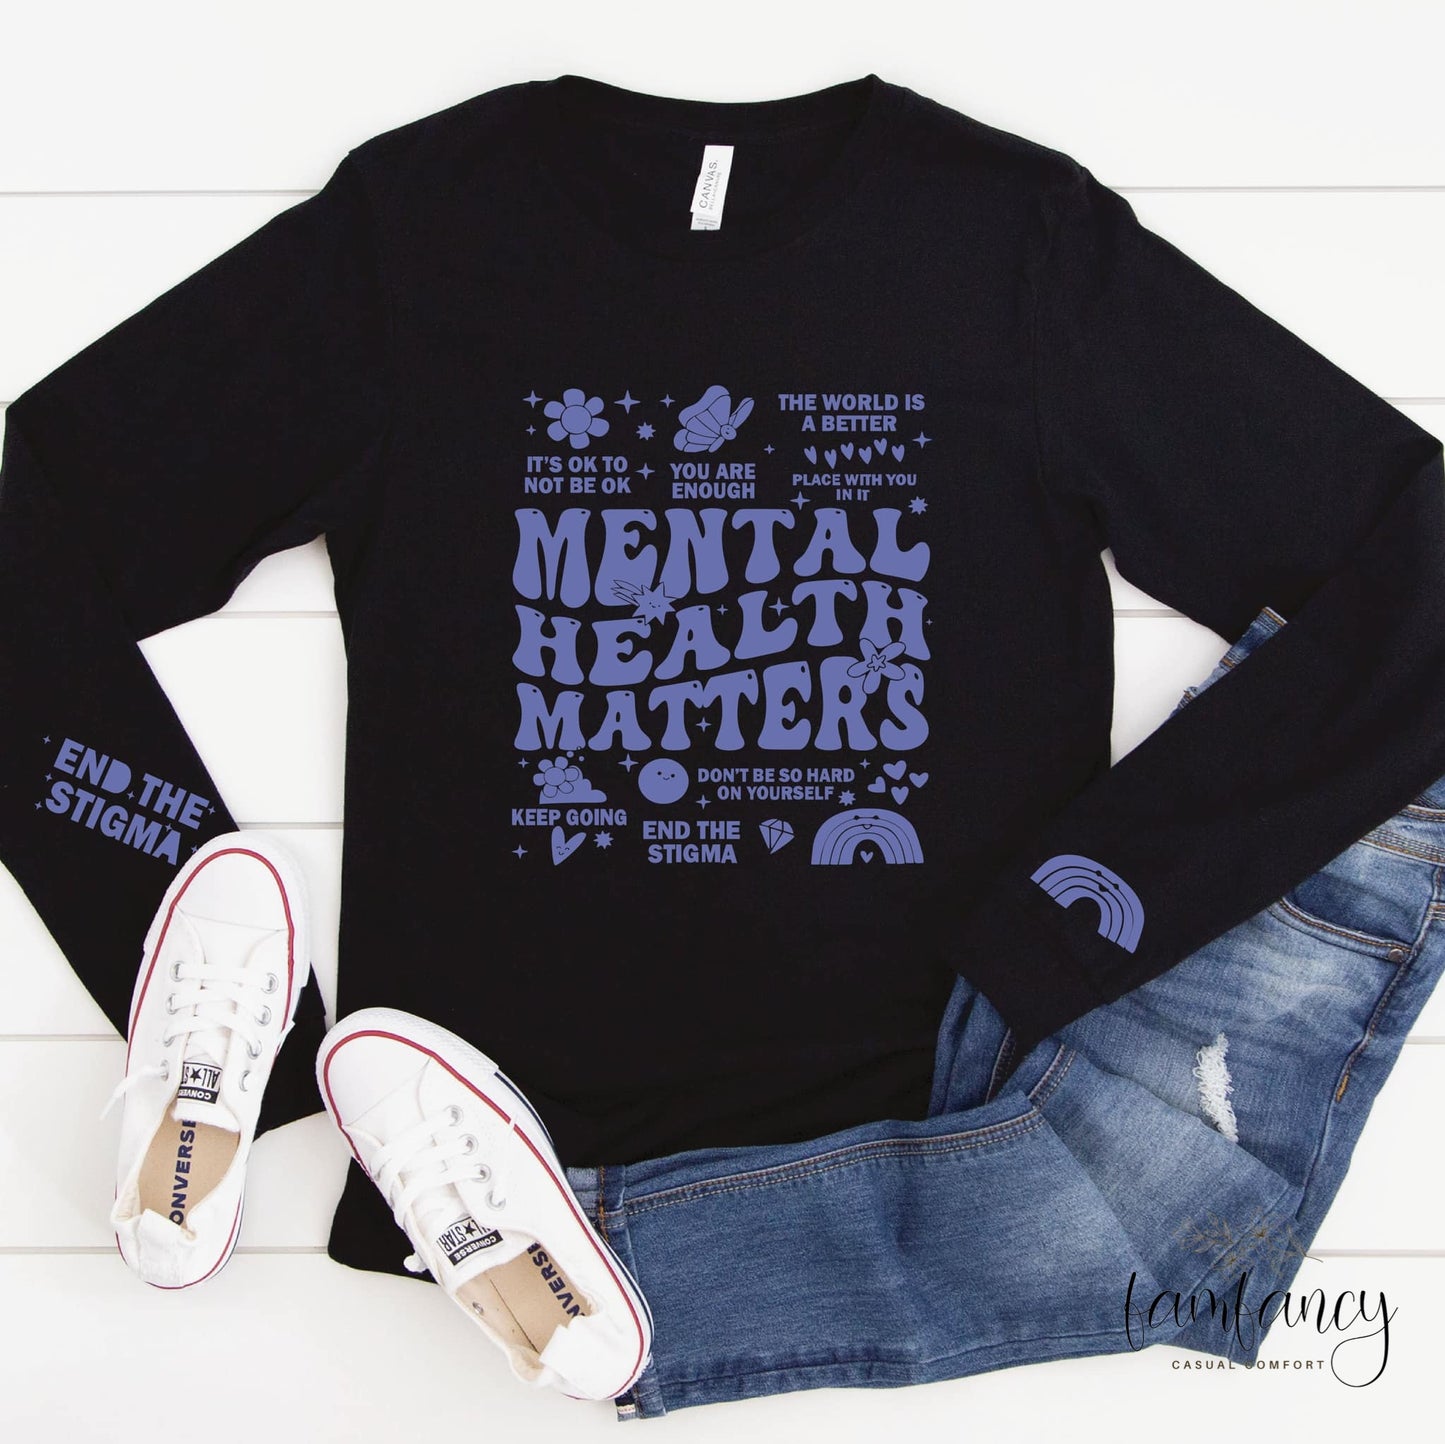 Mental Health Matters Collage With Sleeve Accents - FamFancy Boutique